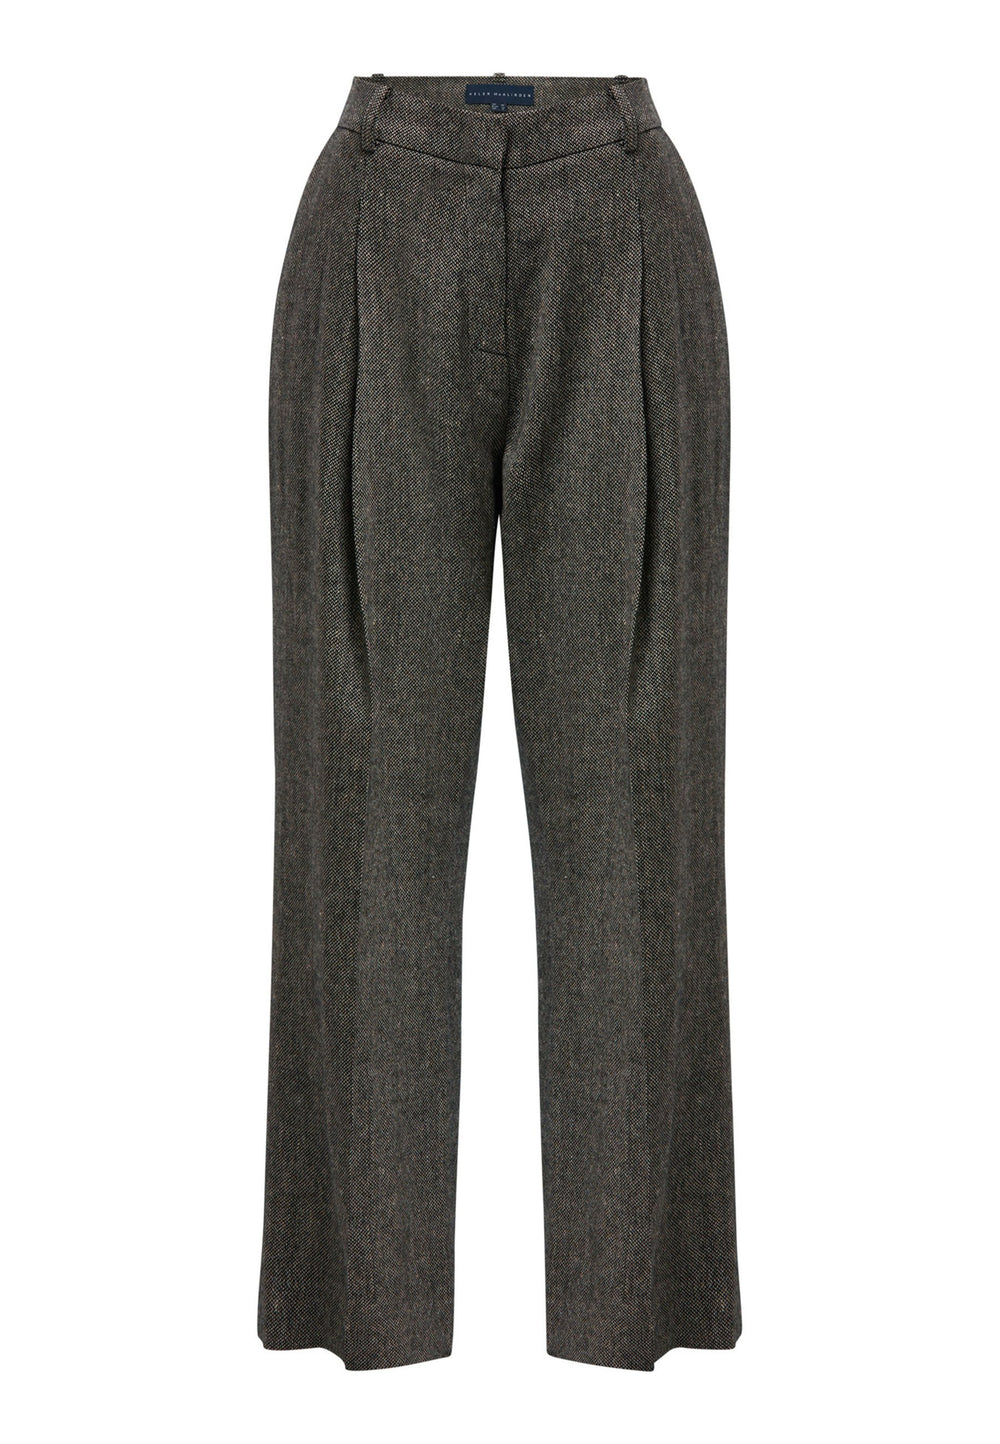 Introducing the Lyra Tweed Trousers, a stylish choice that adds flair to your wardrobe. Featuring a wide leg design with pleat front detailing, these trousers exude sophistication. Crafted from a high-quality black and cream speckled tweed fabric, they embody timeless elegance. The Lyra Tweed Trousers offer versatility, allowing you to dress them up or down for various occasions. 